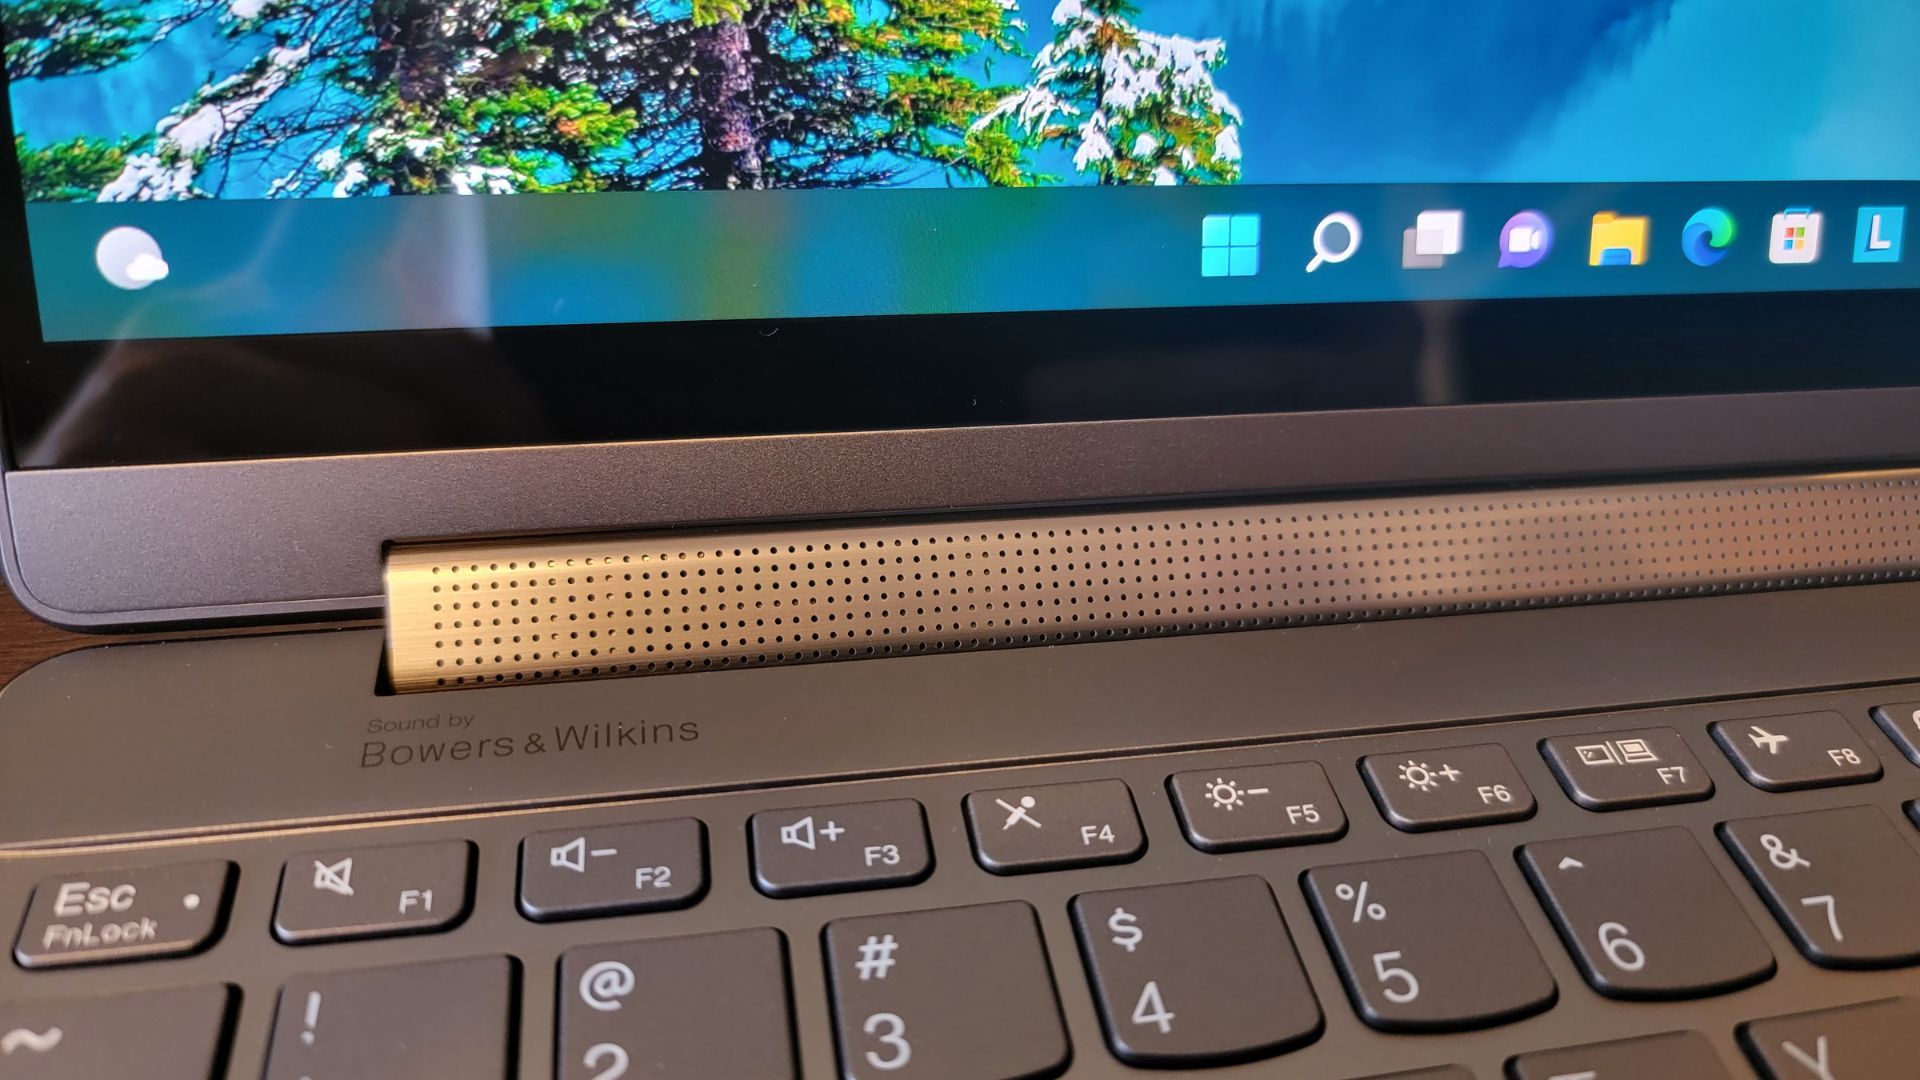 bowers and wilkins 360 sound bar on the lenovo yoga 9i laptop